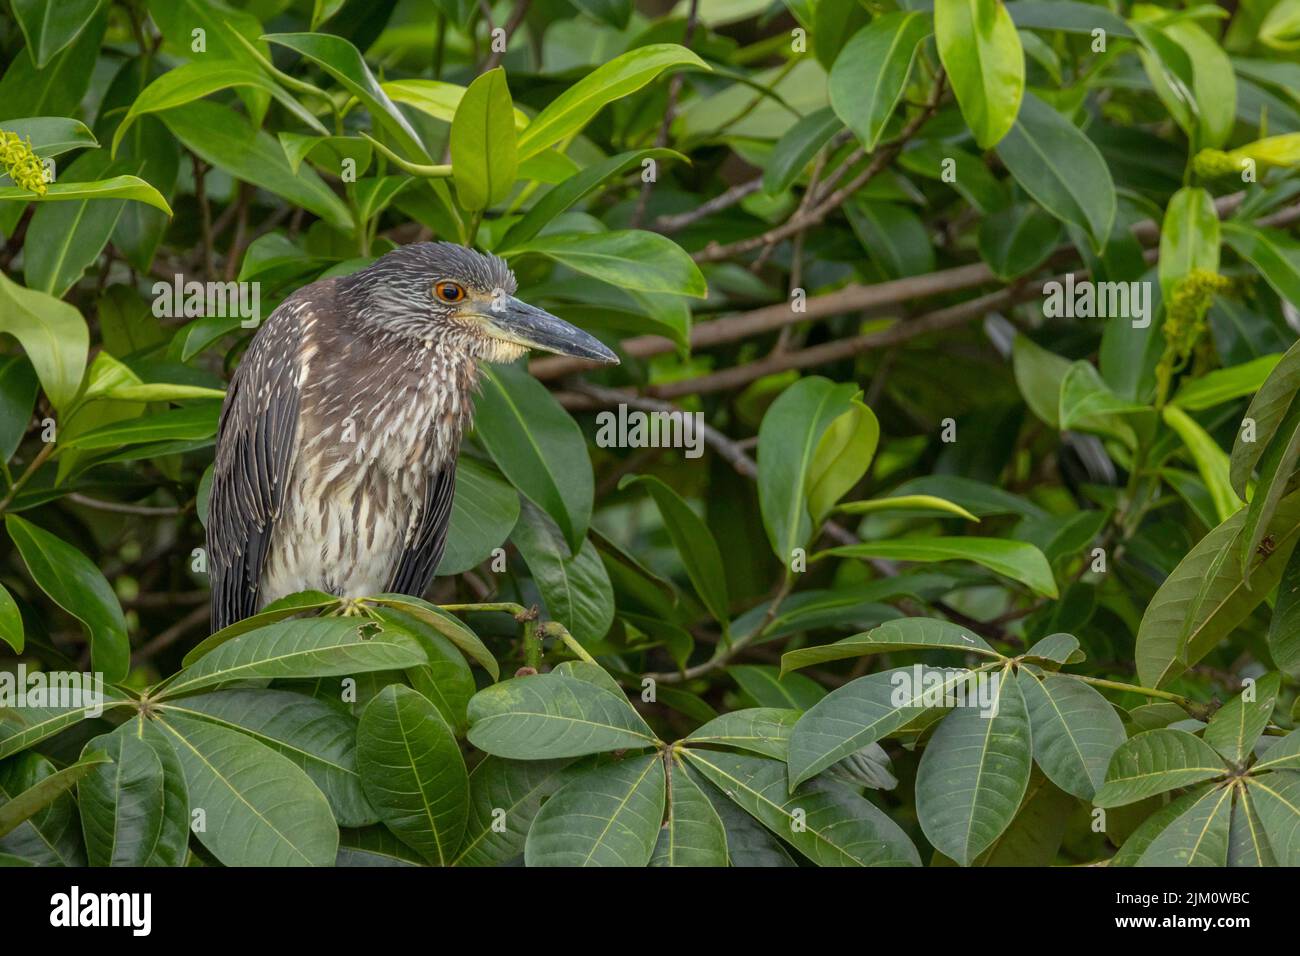 A closeup of the juvenile black-crowned night heron, Nycticorax nycticorax perched on the tree. Stock Photo